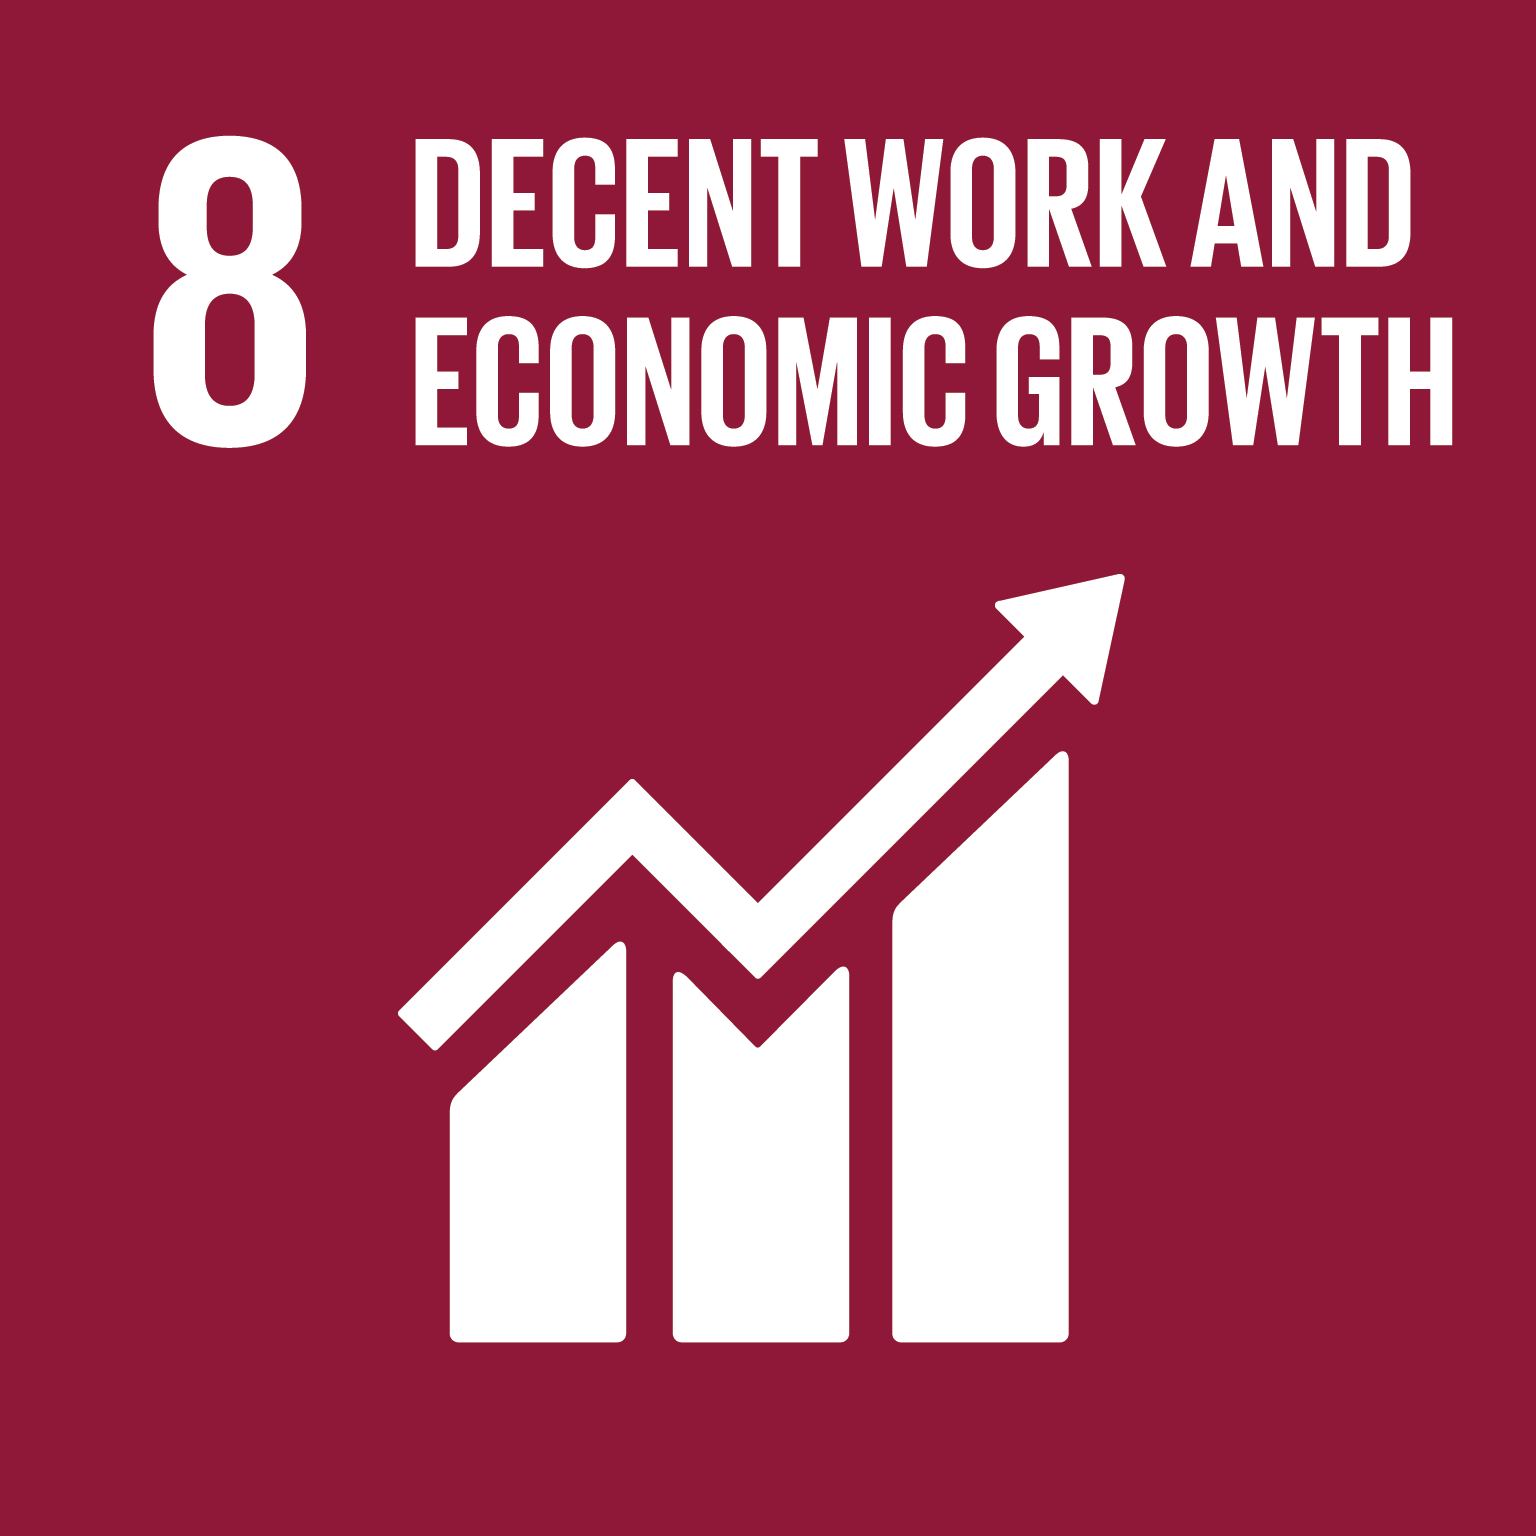 Goal 8 | Department of Economic and Social Affairs